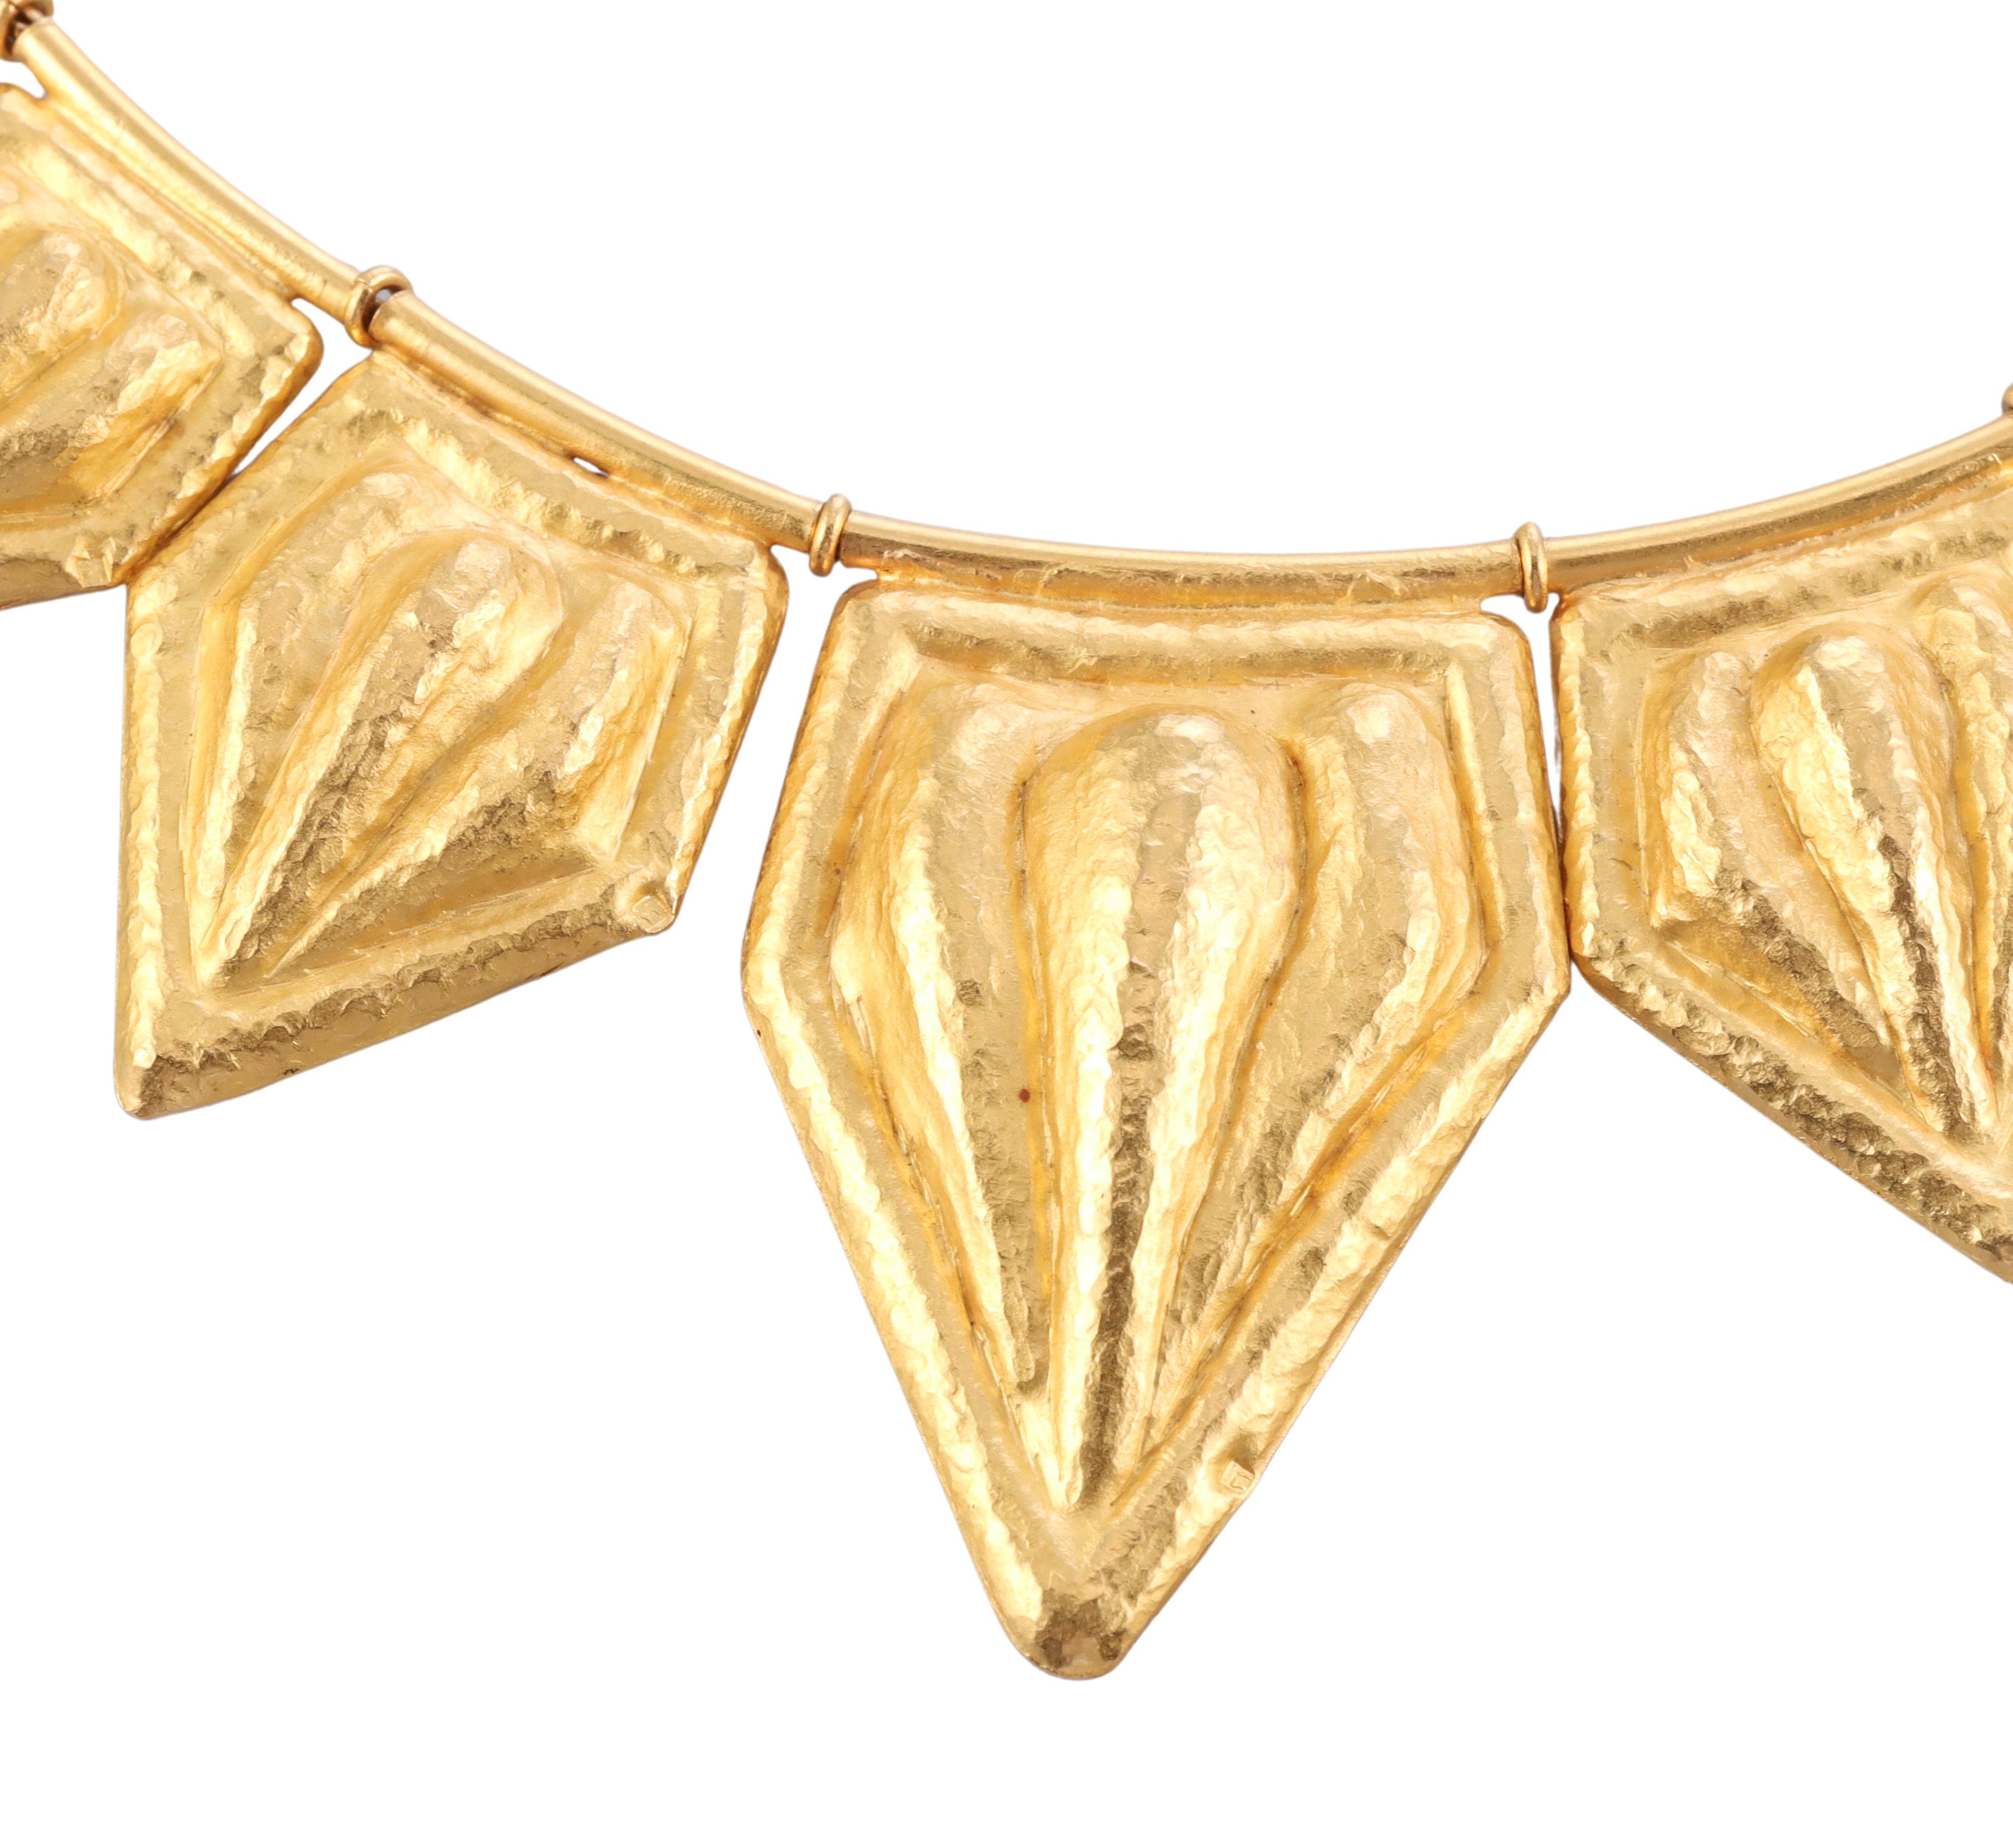 Greek made in 18k hand hammered gold, this necklace features 17 plaque movable elements. The necklace is 14